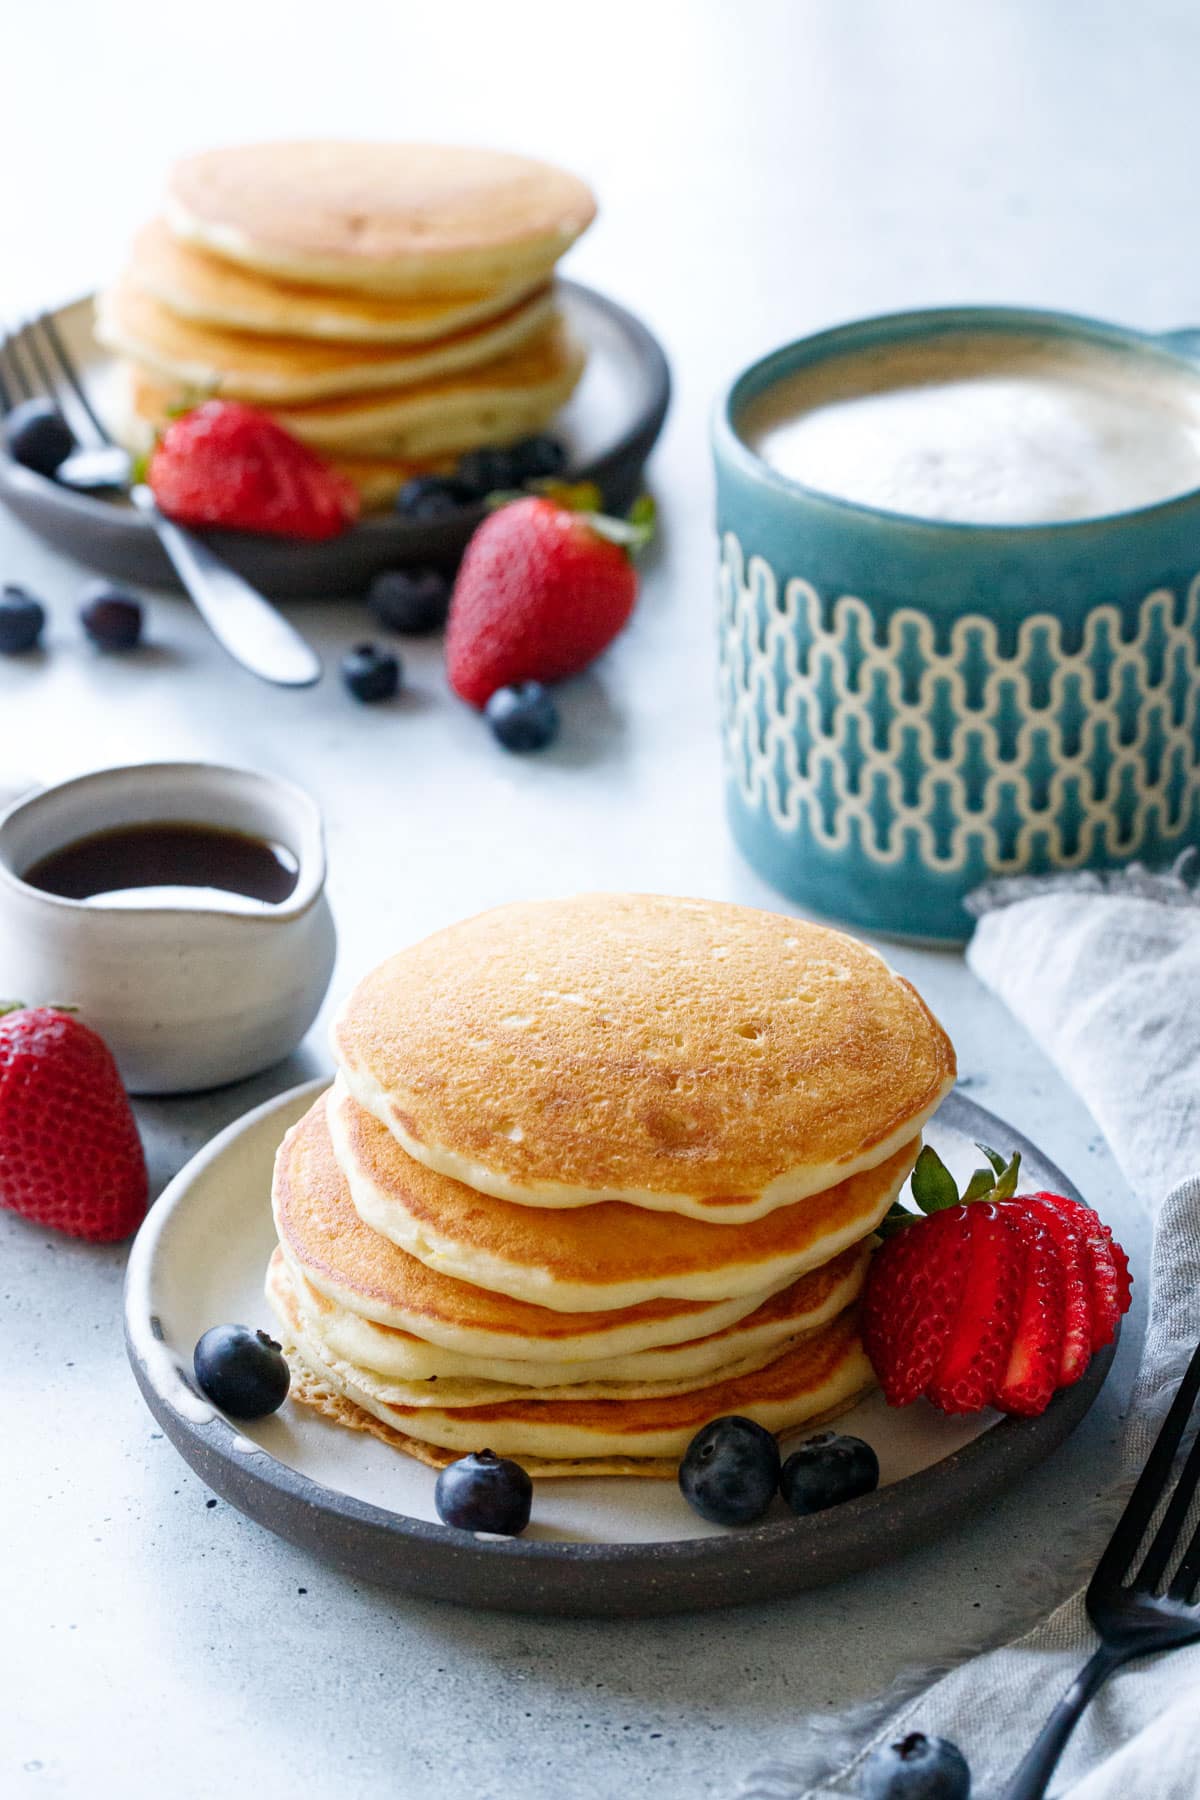 Two stacks of Olive Oil Pancakes on ceramic plates with strawberries and blueberries, mug of coffee on the side.